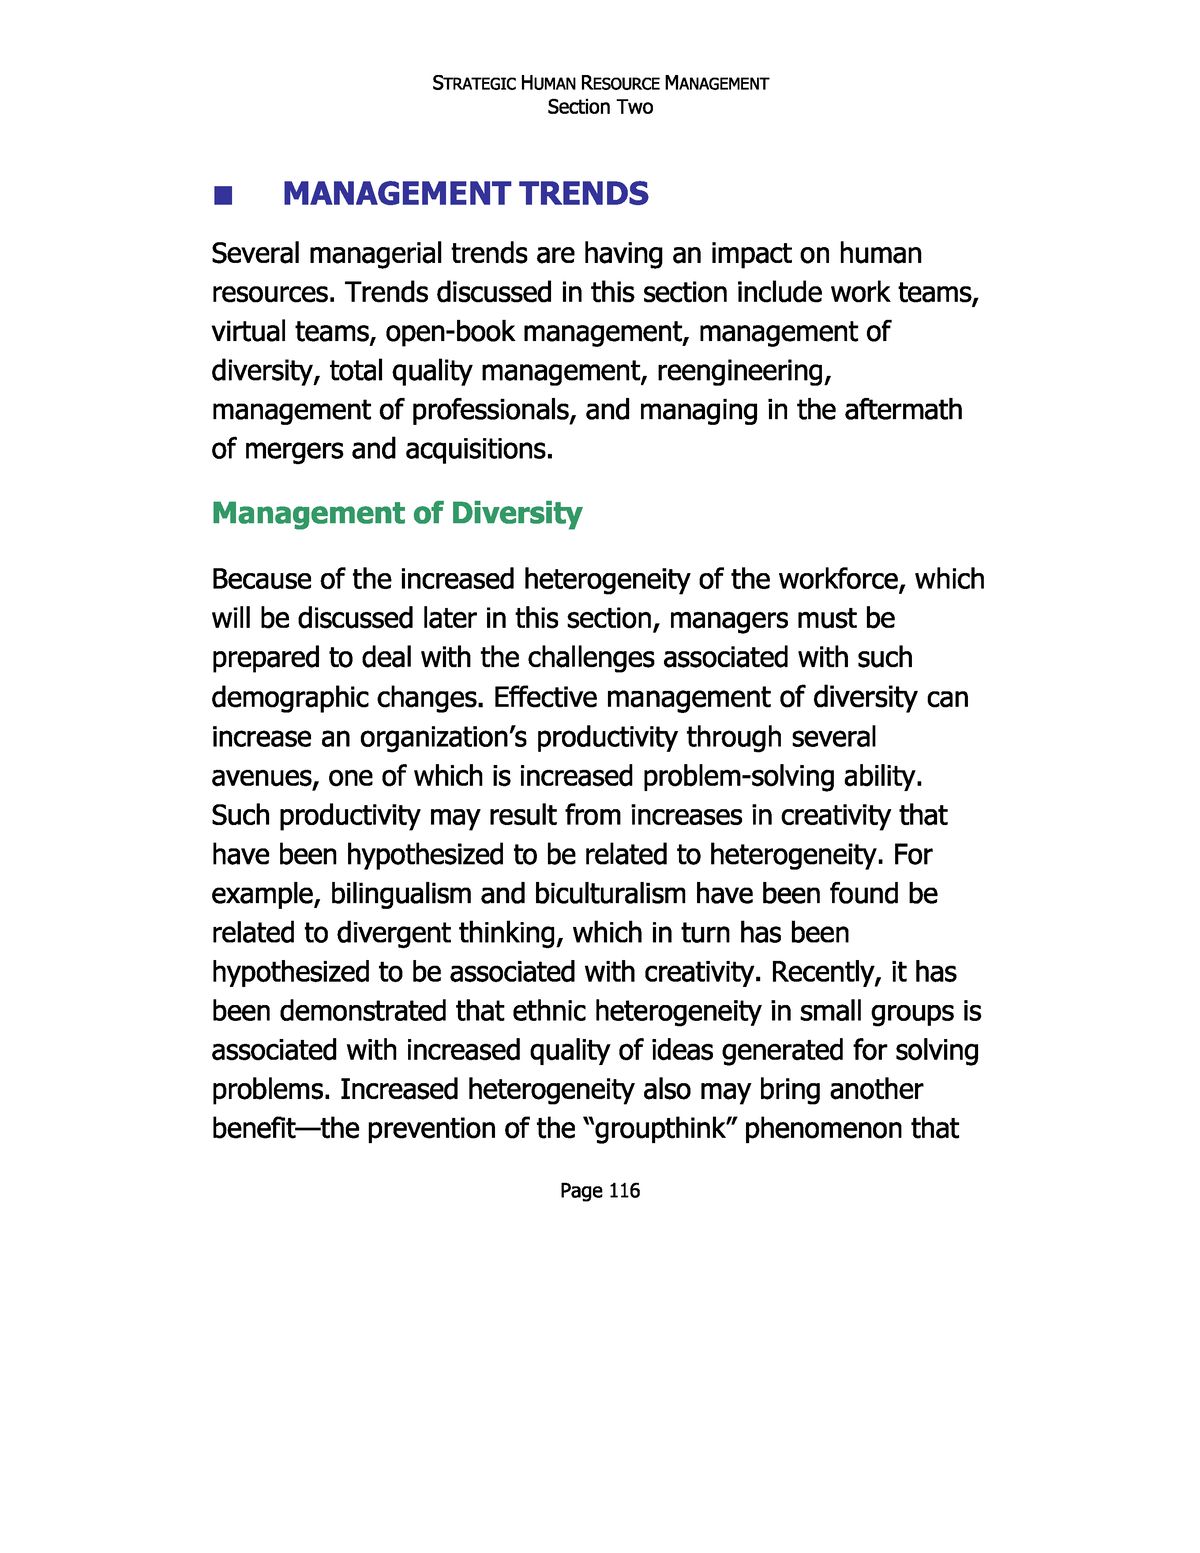 thesis related to human resource management